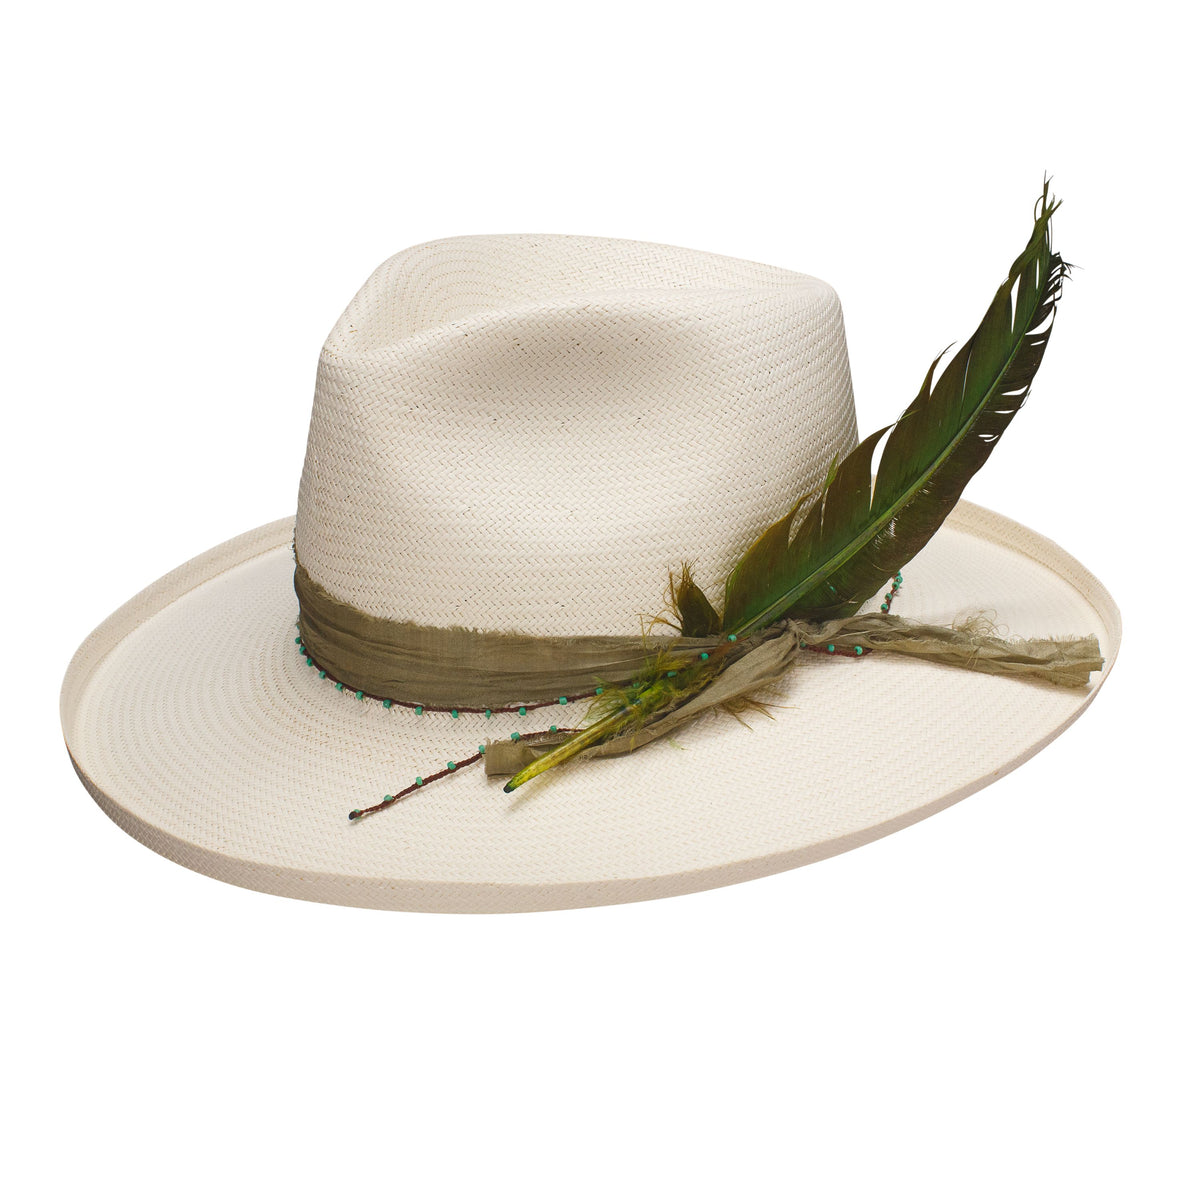 Stetson Free Thinker Fashion Straw Hat in Natural